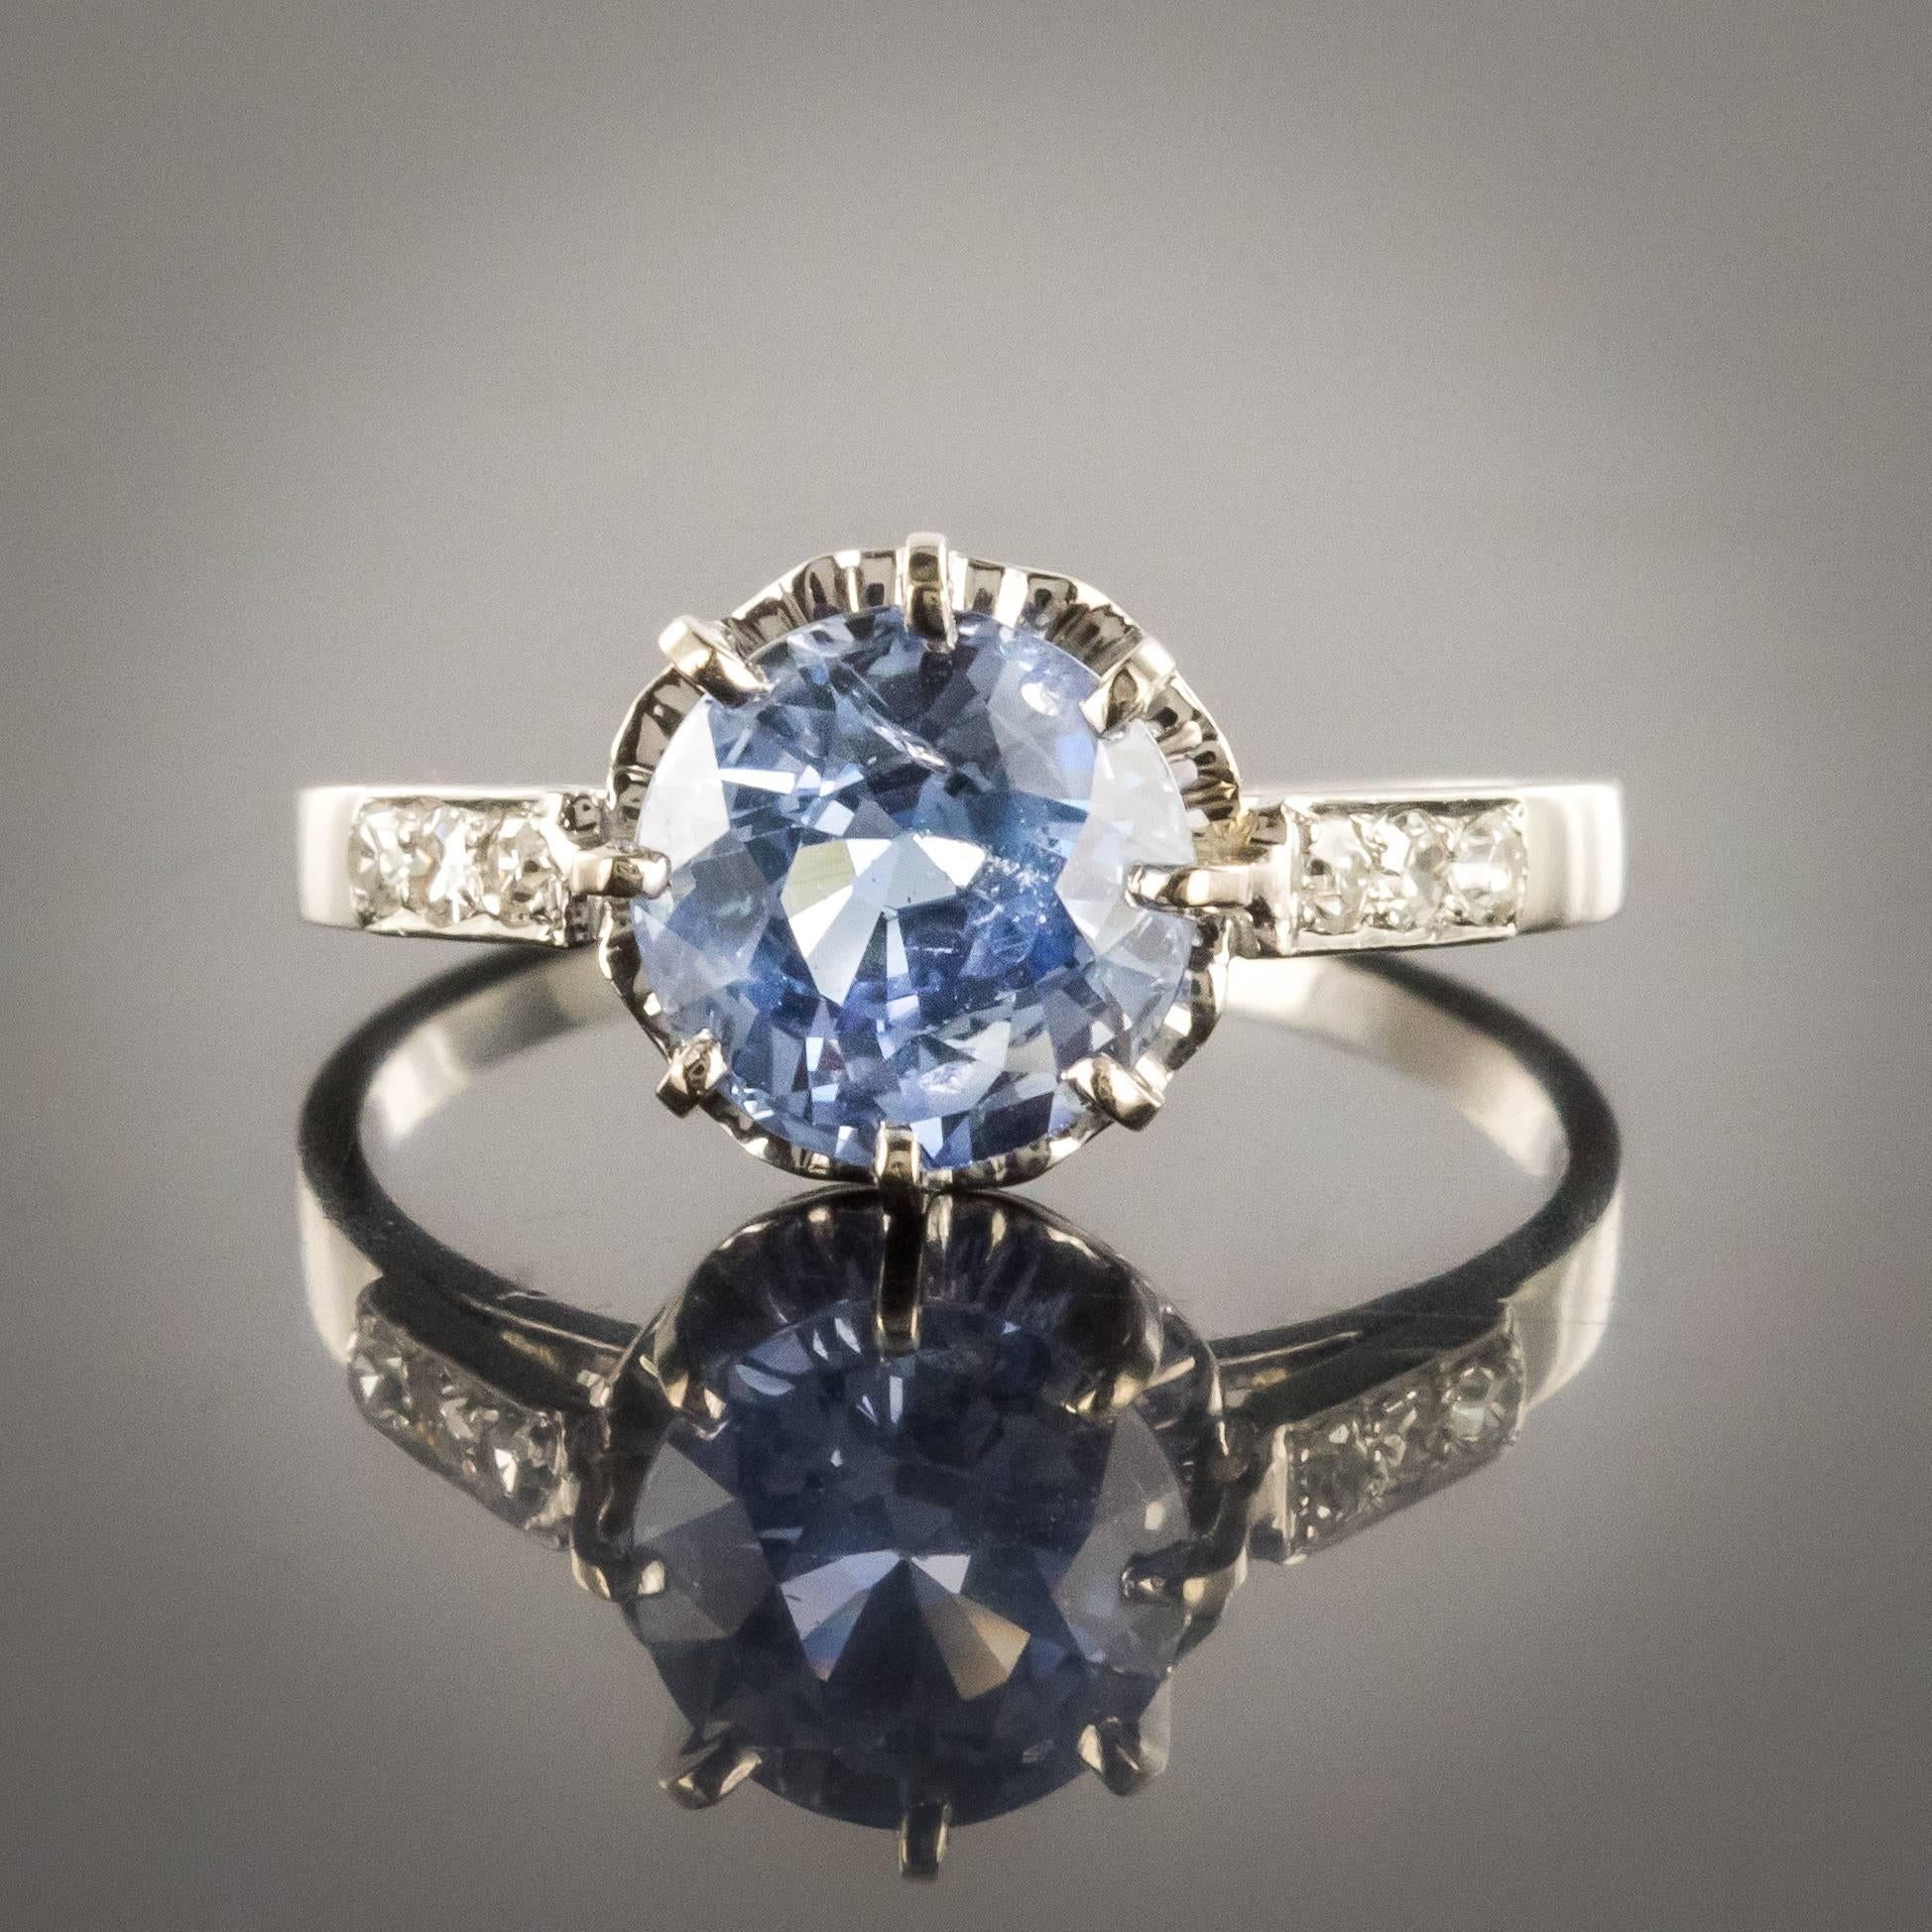 Ring in platinum, dog's head hallmark.
This elegant antique art deco ring is set with claws of a round sapphire crystal clear and limpid. On both sides on the departure of the ring are set 2 x 3 diamonds. The basket is perforated to allow light to